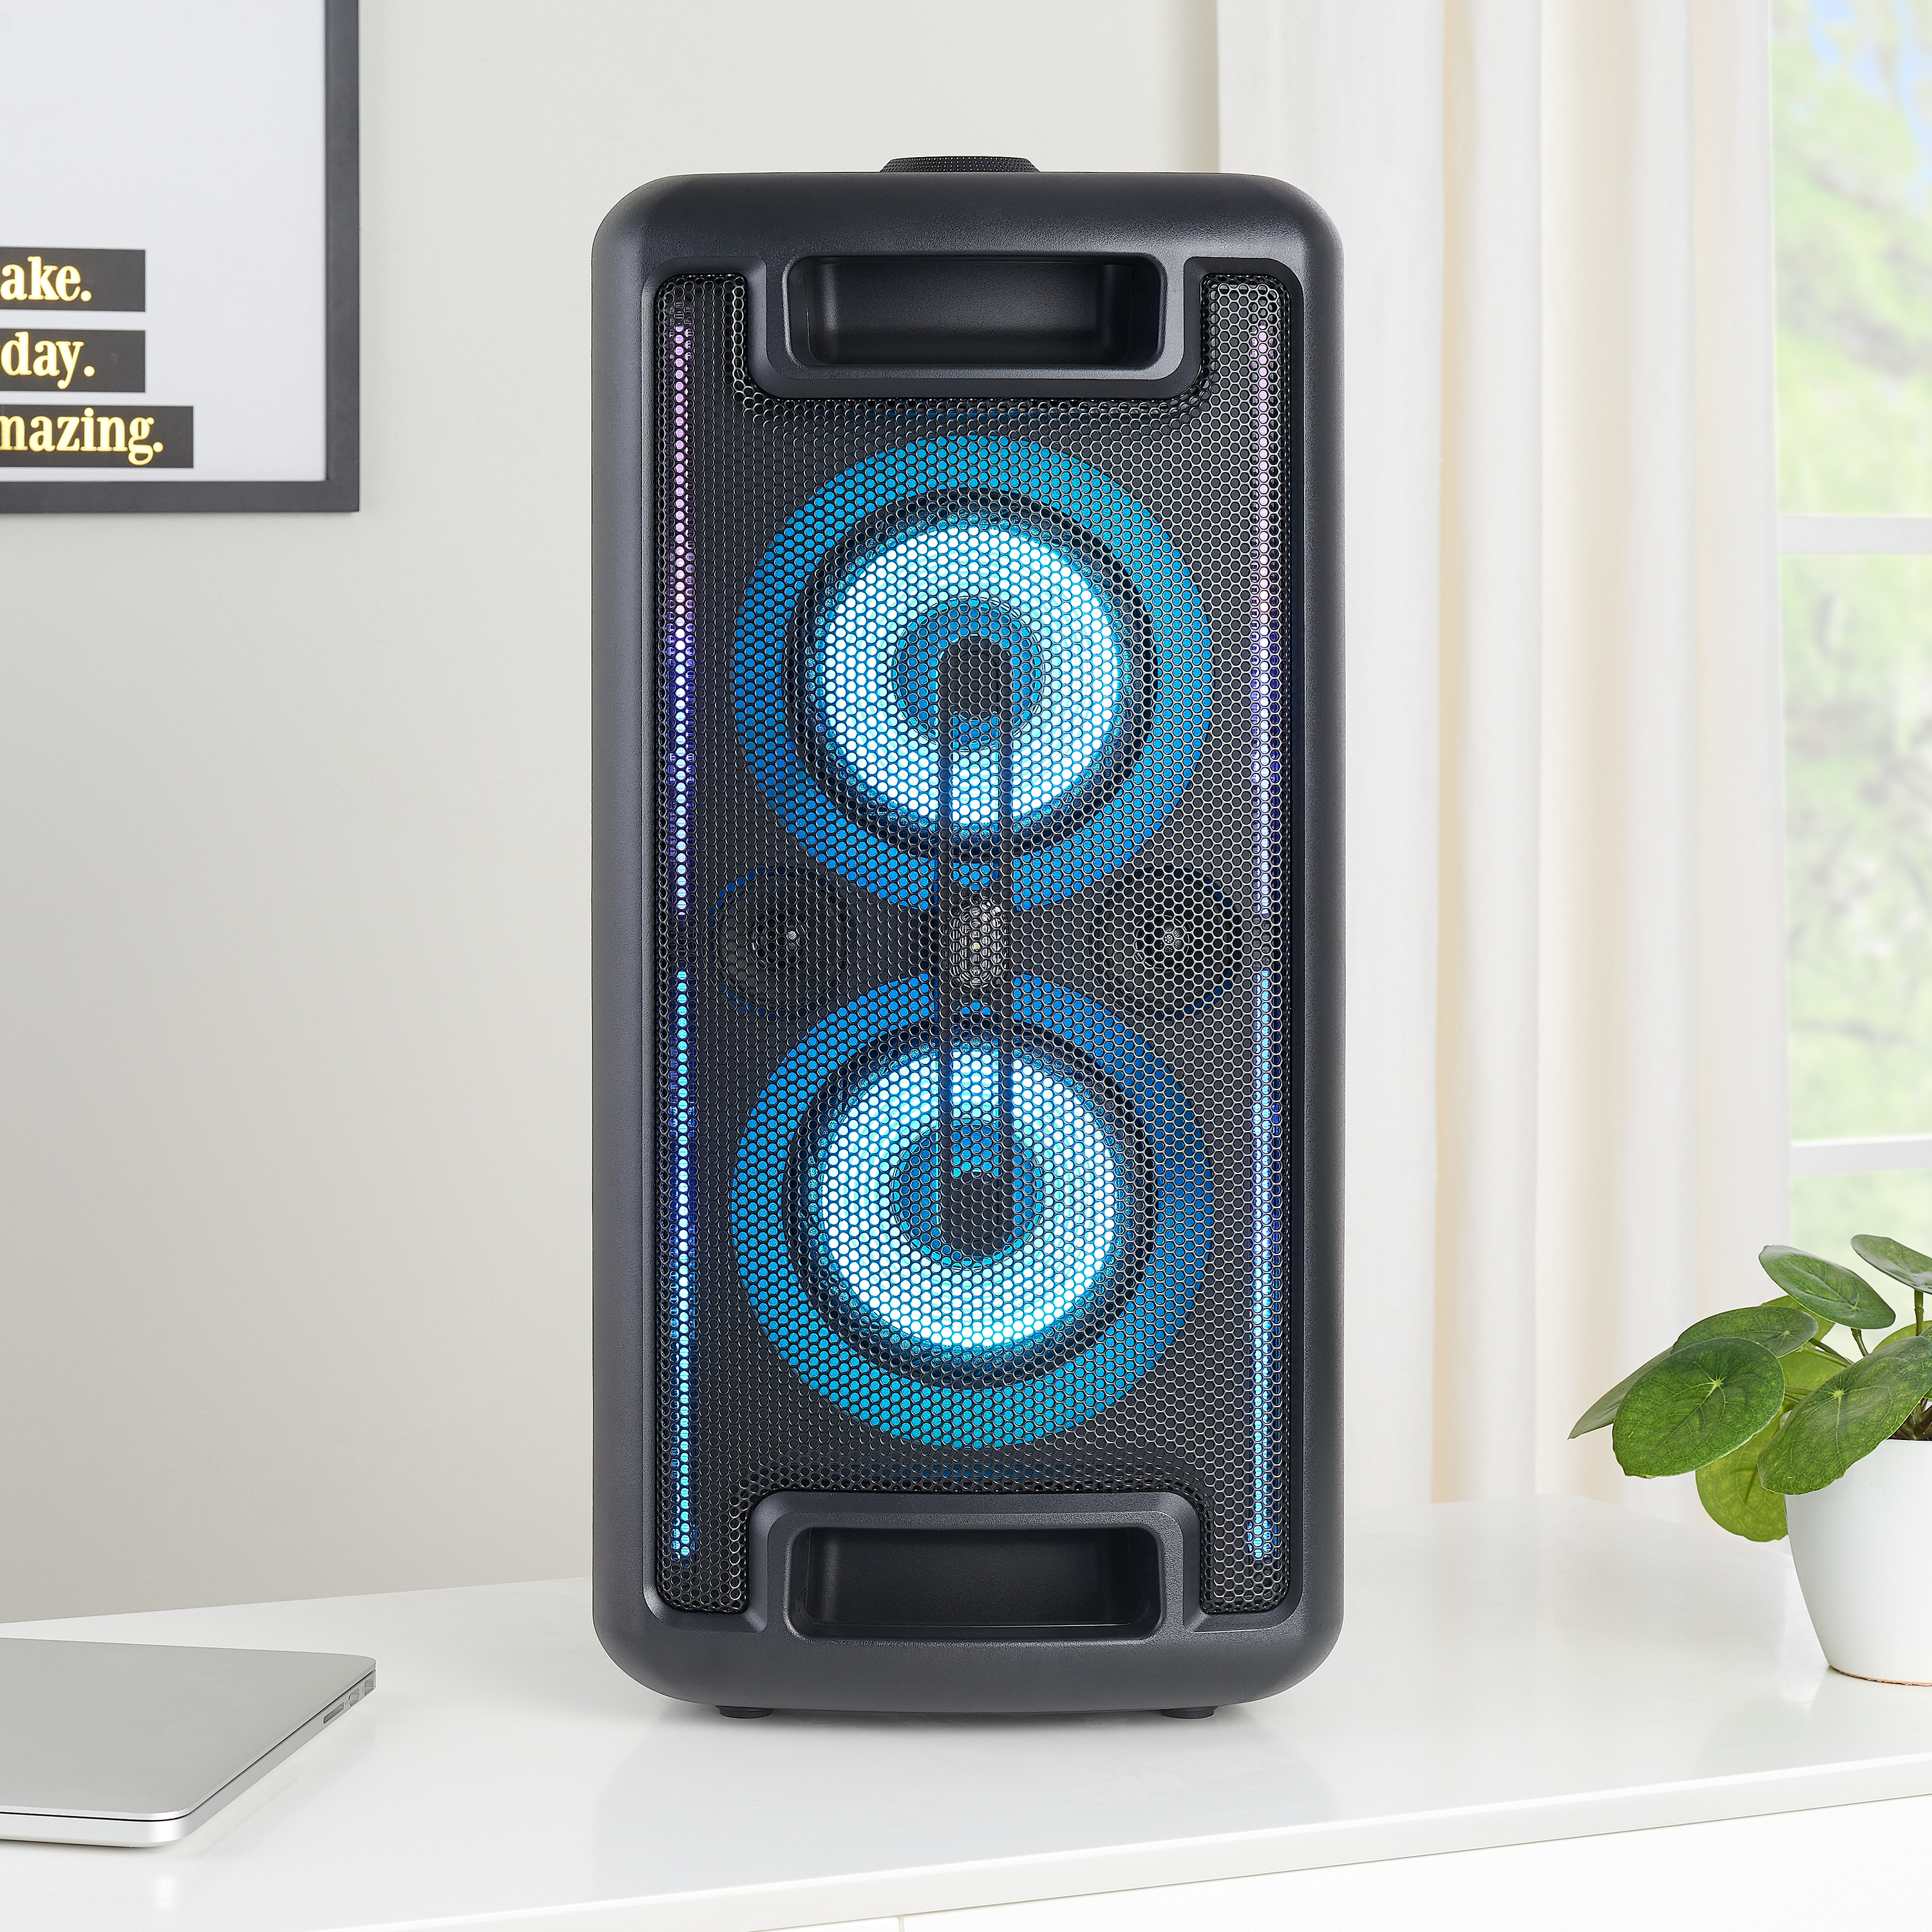 onn. Large Party Speaker with LED Lighting - image 3 of 6